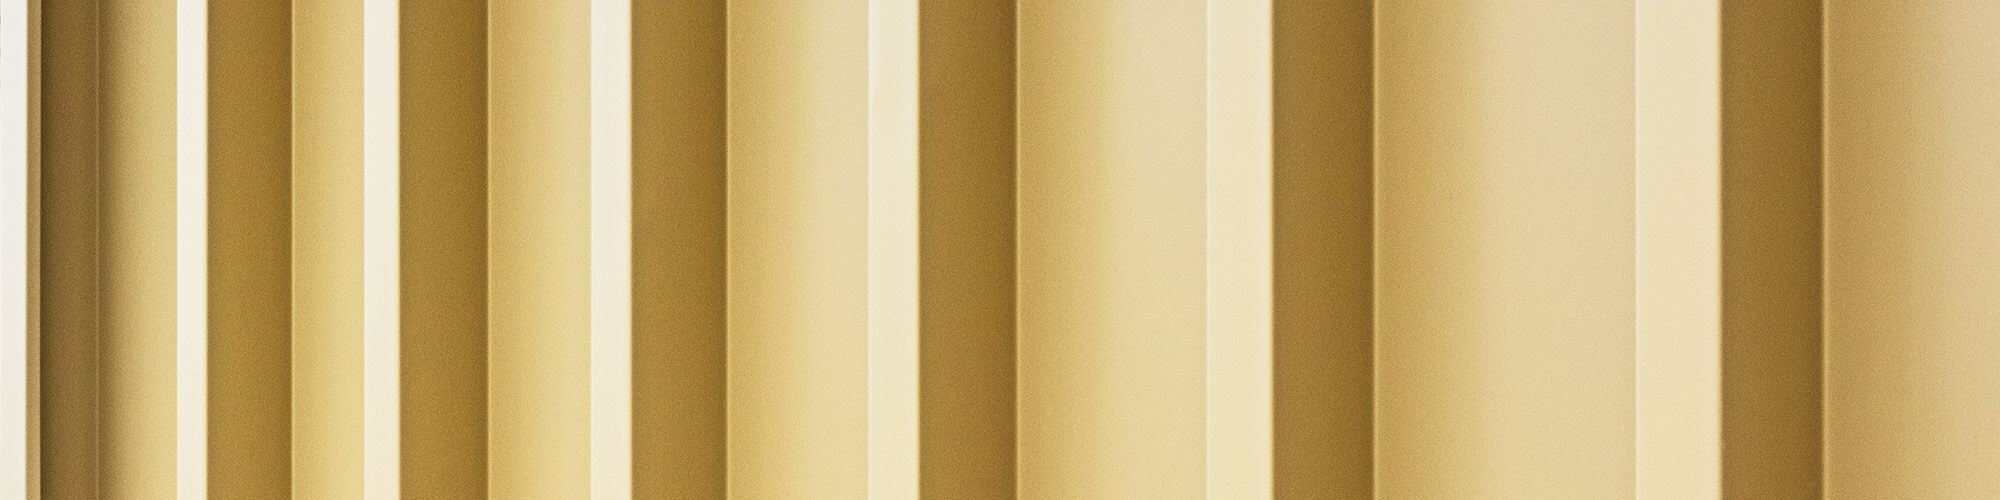 A close-up of the lined, remarkably radiant and savannah beige Prefalz façade.